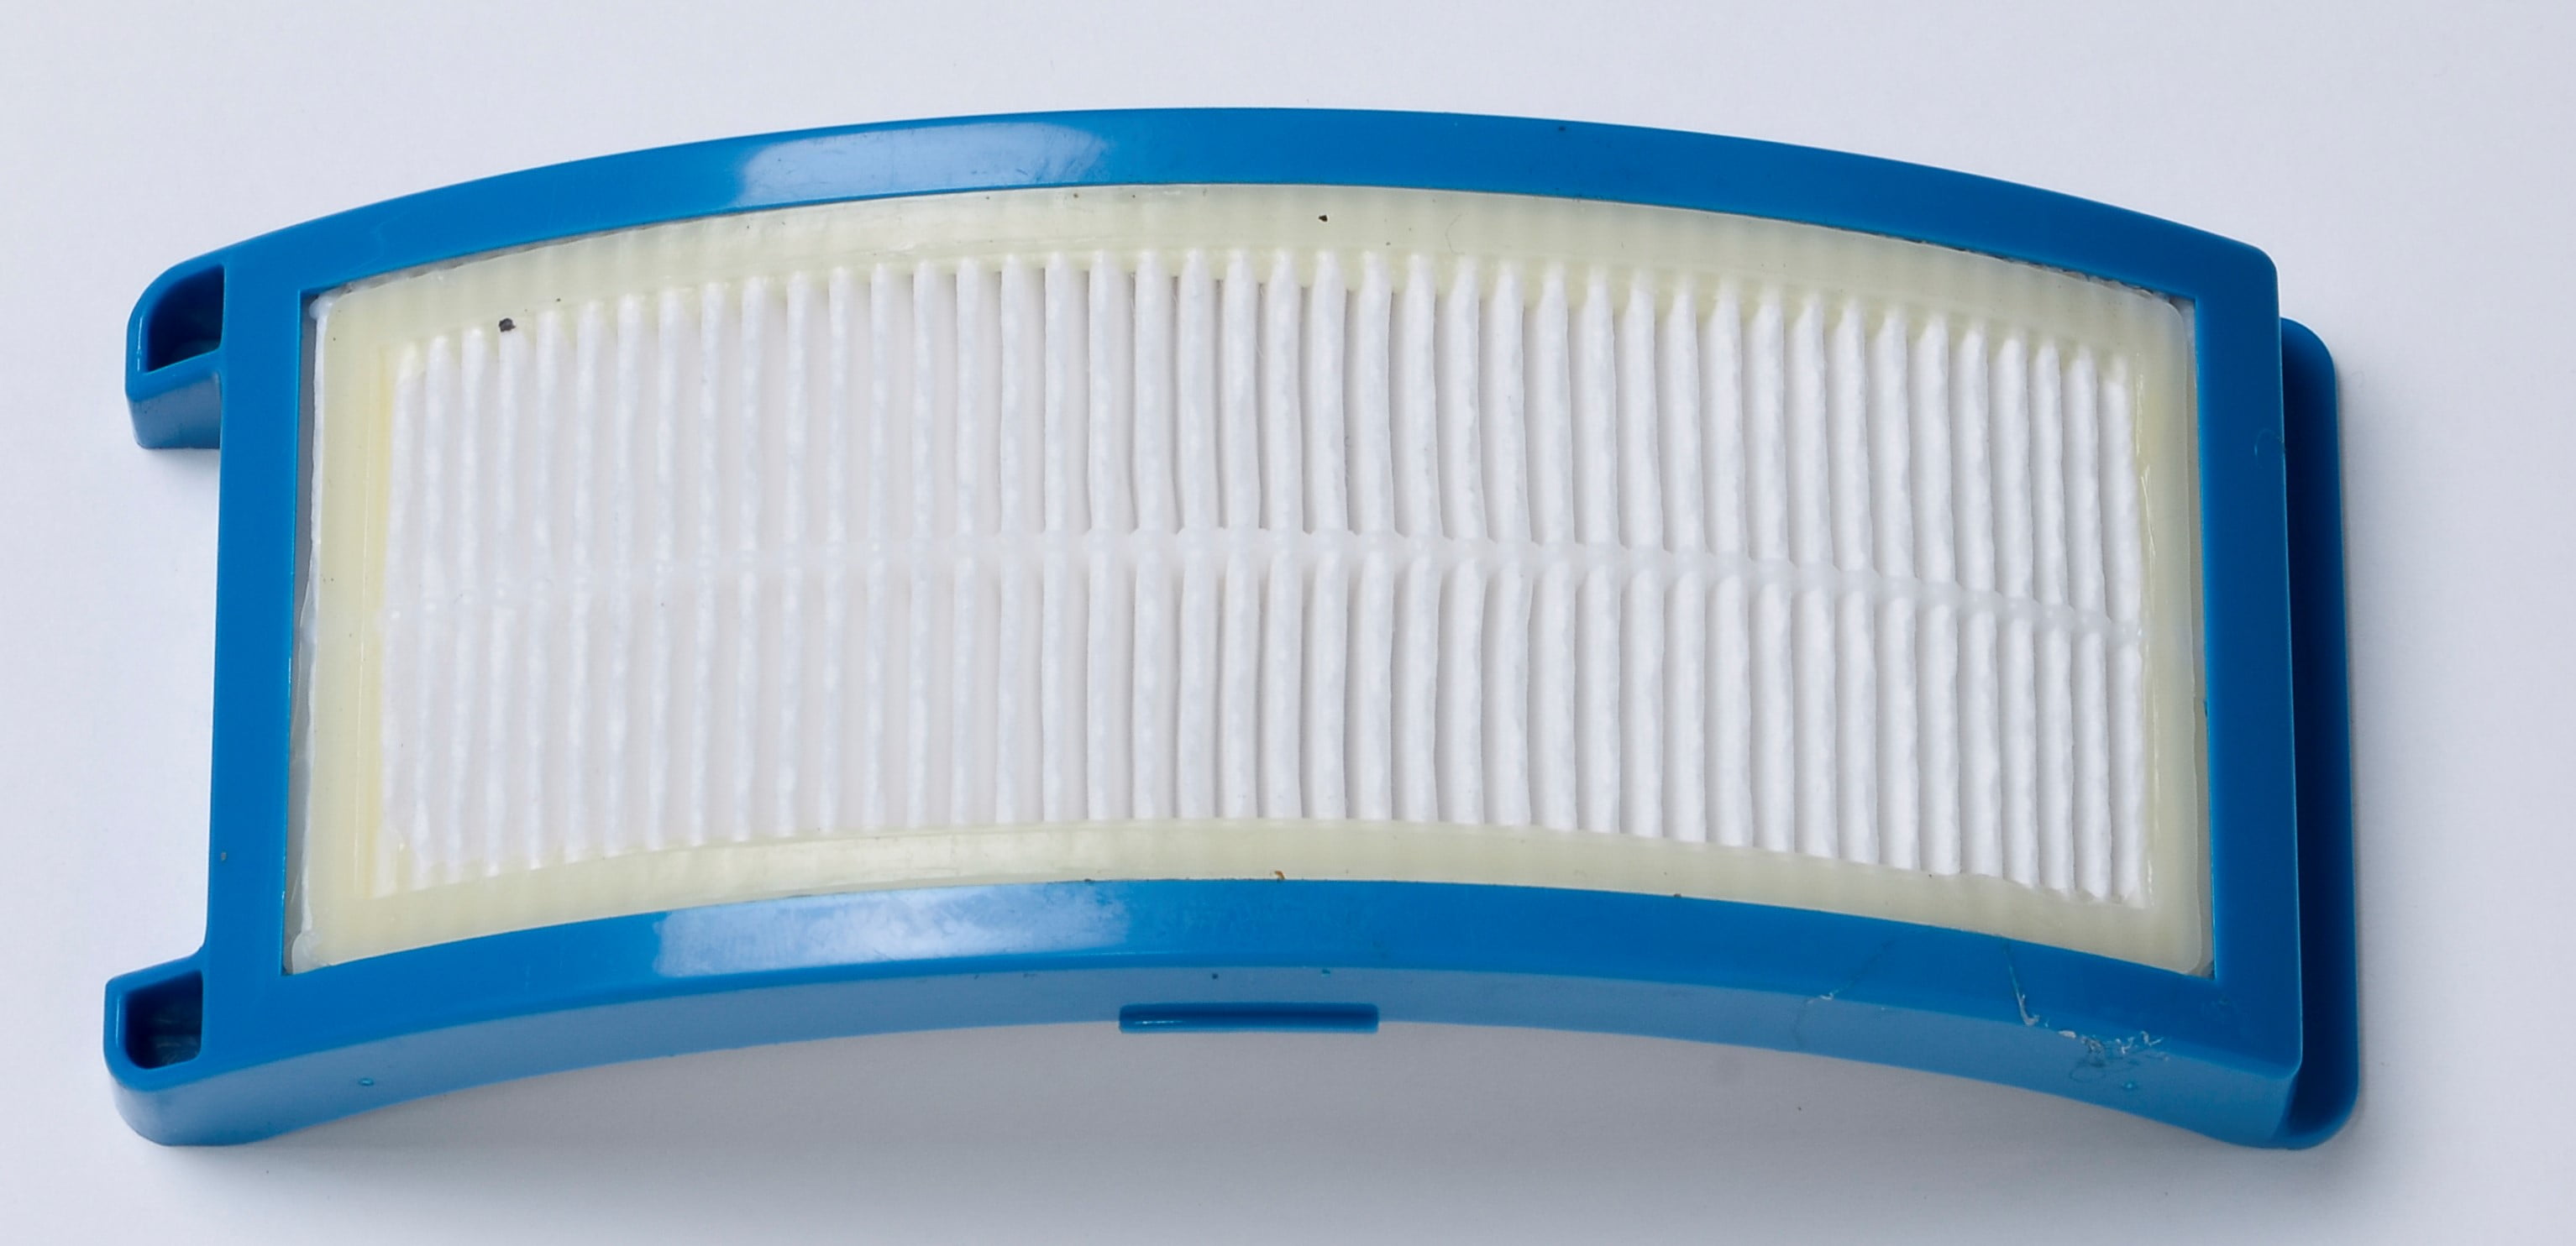 Details about   New Febreze Spring & Renewal Vacuum Filter Bissell Style 12 ~ Reduces Allergens 